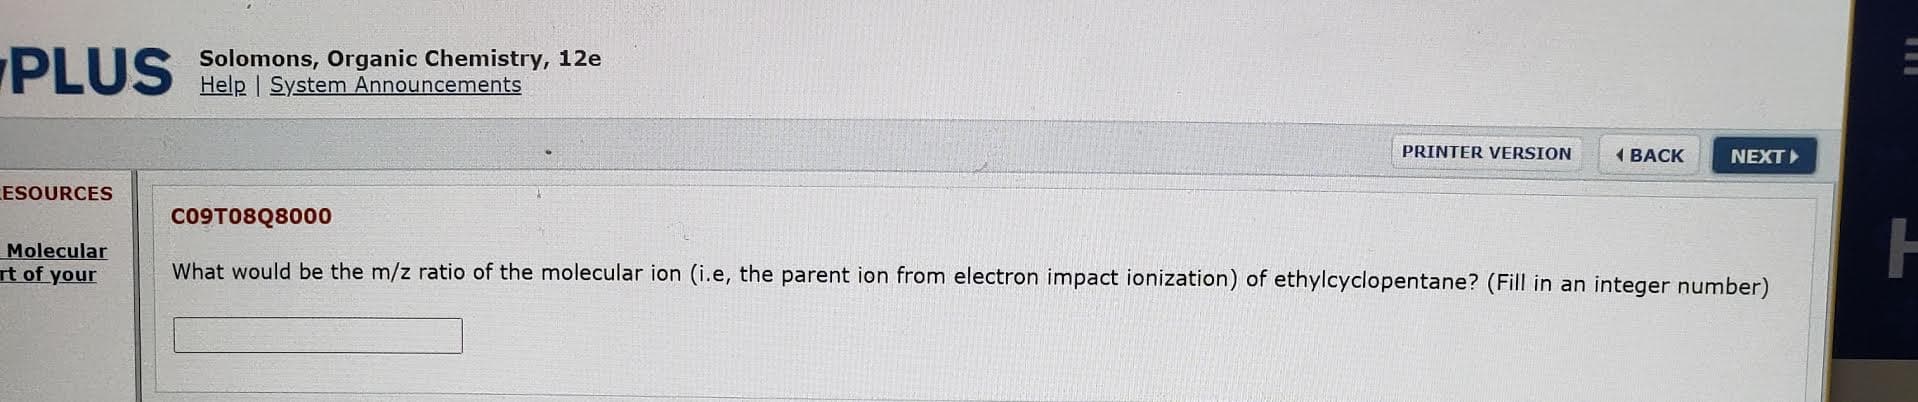 What would be the m/z ratio of the molecular ion (i.e, the parent ion from electron impact ionization) of ethylcyclopentane? (Fill in an integer number)
